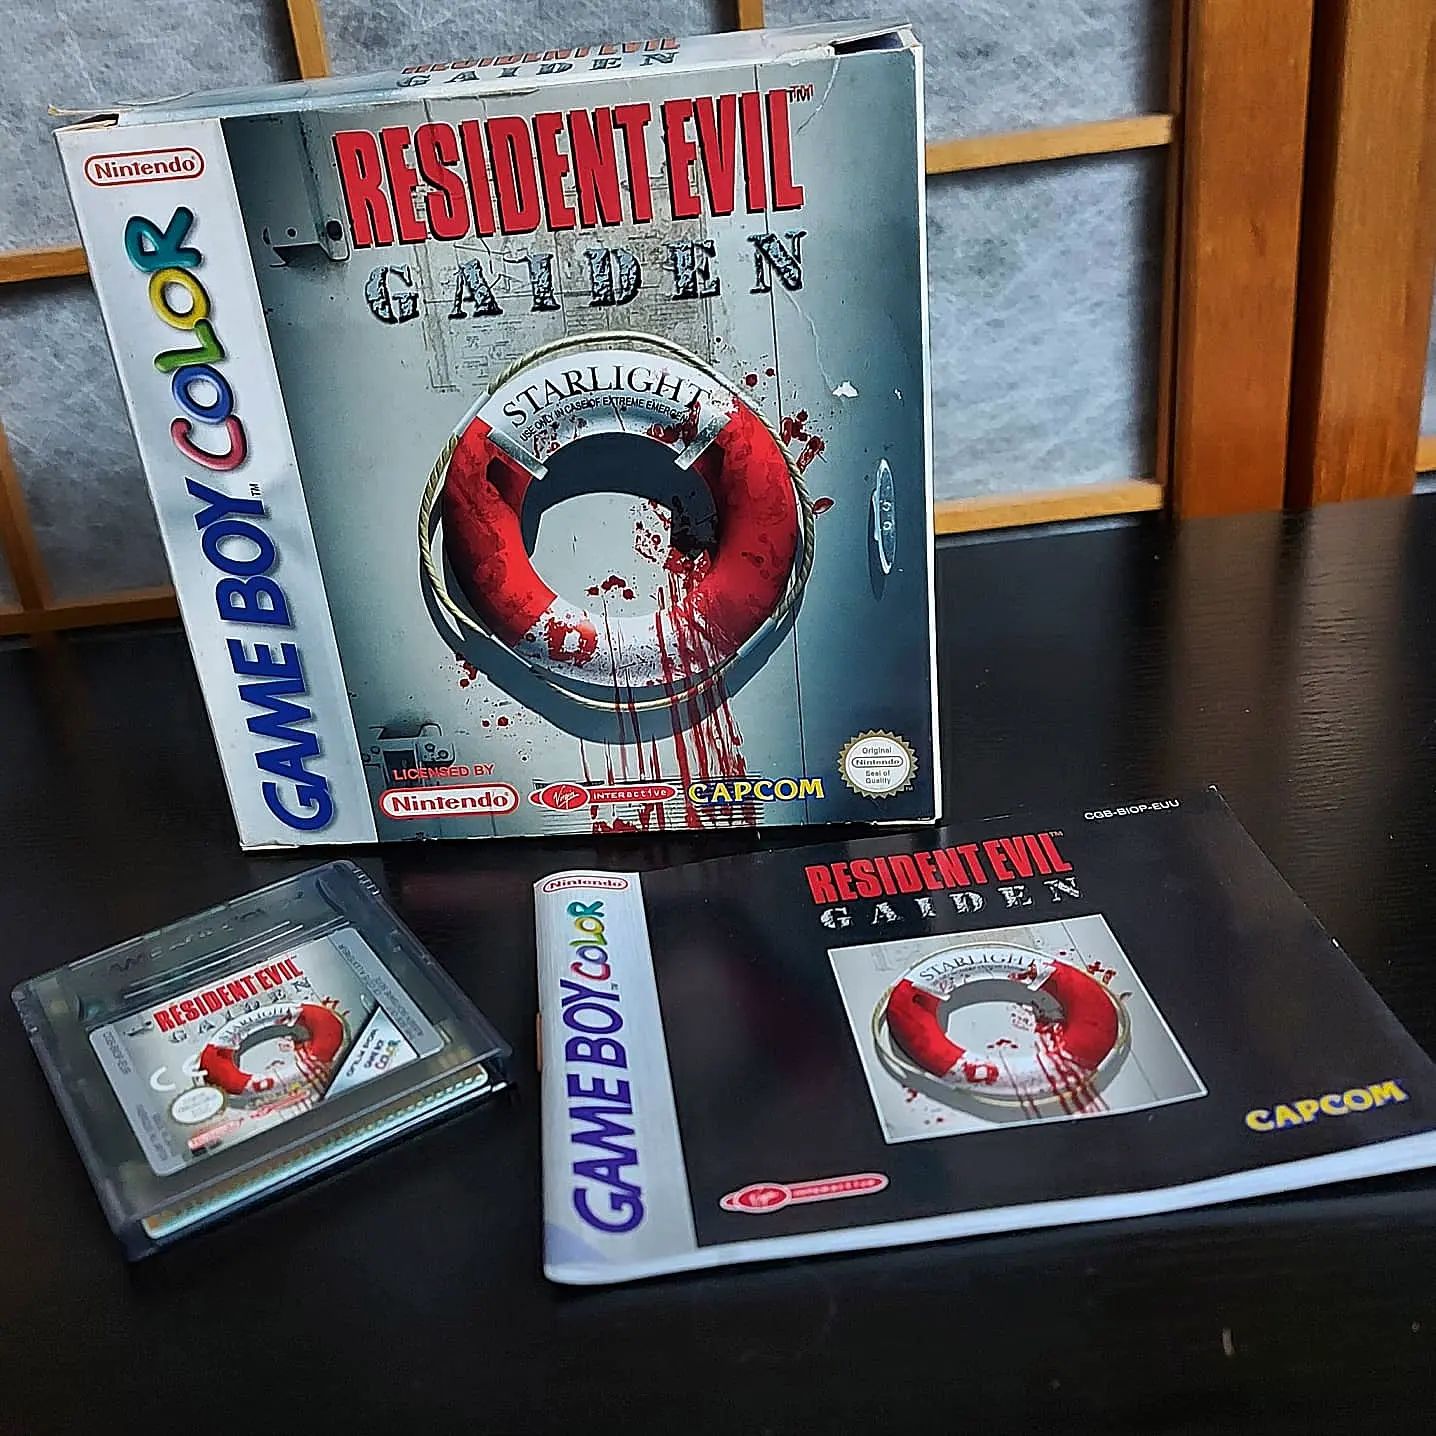 Resident Evil Gaiden! So happy I found this couple of years ago. I've been in a horrorgame mood lately. The better the weather, the more I always want to play dark and scary games.

Not that RE Gaiden is very scary. It is however a way better game than I thought. They really made the best of it with a cool setting. And you can play as Barry!

This is also one of the few games where the cover art of the PAL version looks way better than the US one.

This is a reposted photo of an old post I did quite a while ago. Been way too busy and my gameroom is in a state of chaos...

#retrogamepapa #gaming #gamecollector #gamecollecting #retrogames #retrogamecollector #gameboy #residentevil #gameboycolor #residentevilgaiden #handheld #handheldgaming #survivalhorror #horrorgames #capcom #barry #jiblsandwich #nintendo